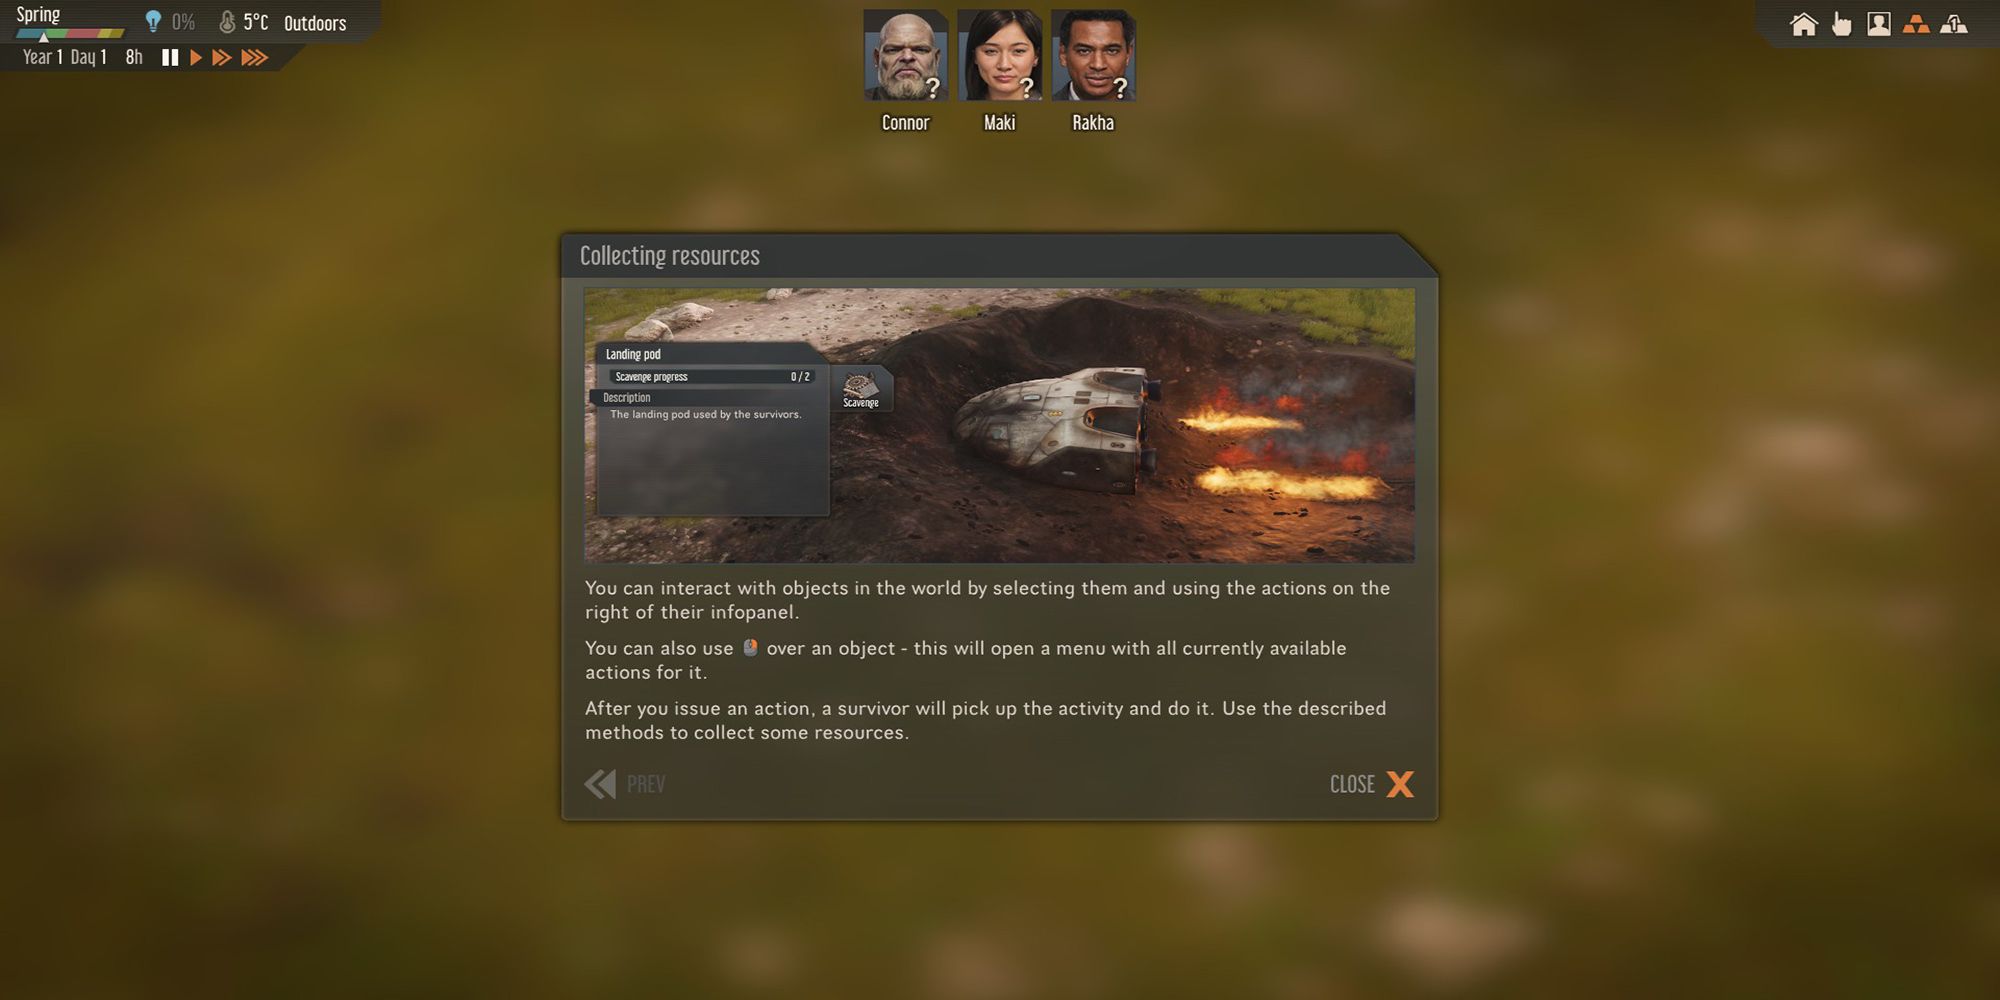 A dialog window explains how to harvest resources in Stranded: Alien Dawn.